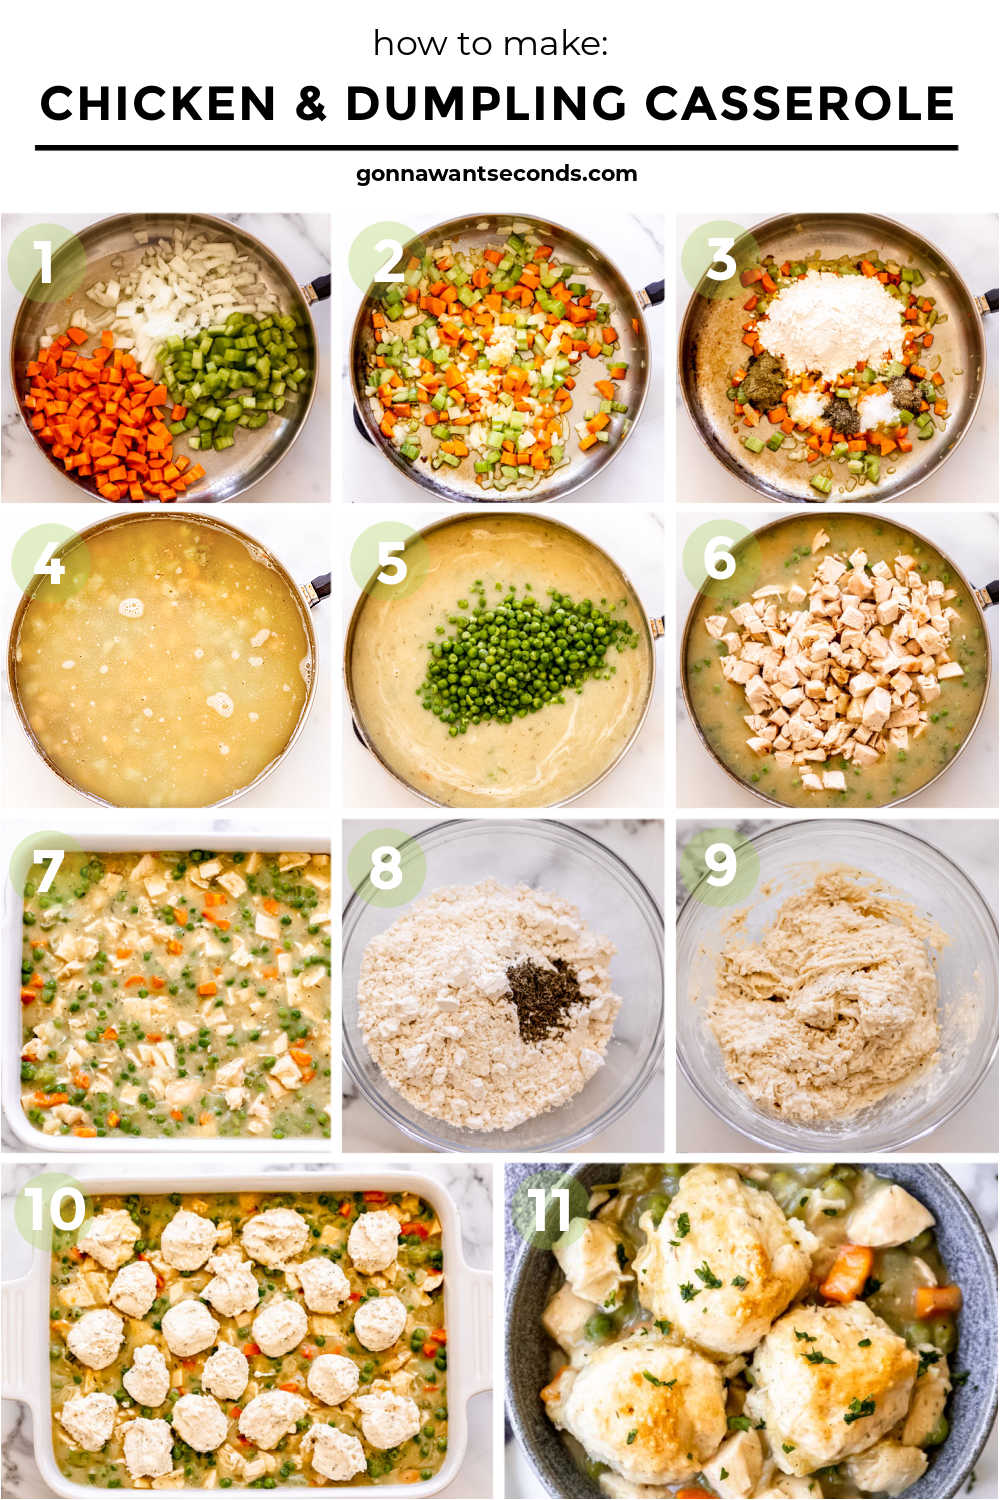 step by step how to make chicken and dumpling casserole